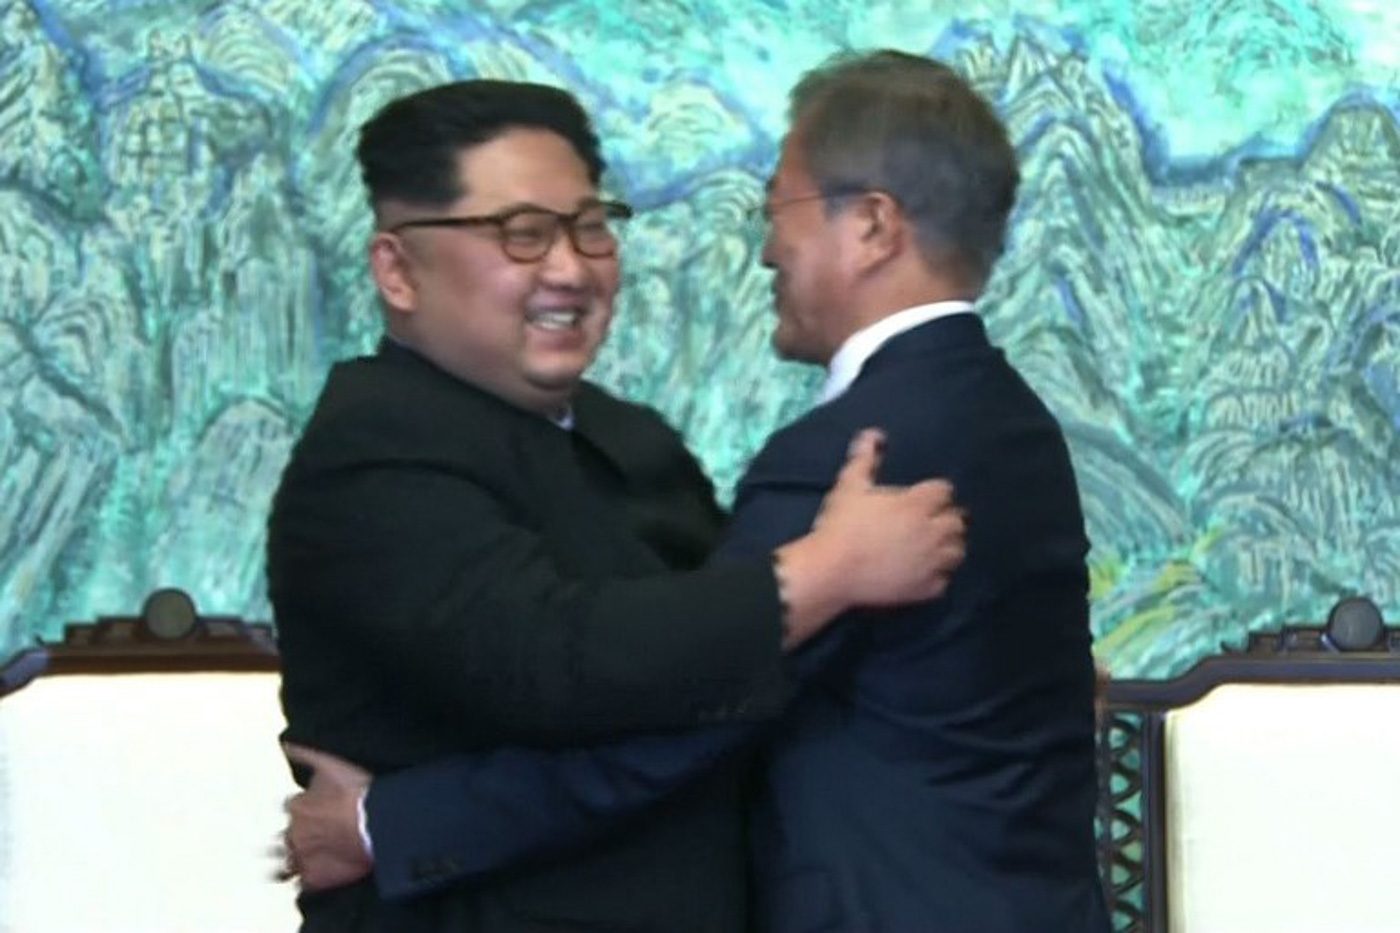 This screen grab from the Korean Broadcasting System (KBS) taken on April 27, 2018 shows North Korea's leader Kim Jong-Un (L) embracing South Korea's President Moon Jae-in (R) near the end of their historic summit at Panmunjom. AFP PHOTO / KOREAN BROADCASTING SYSTEM 